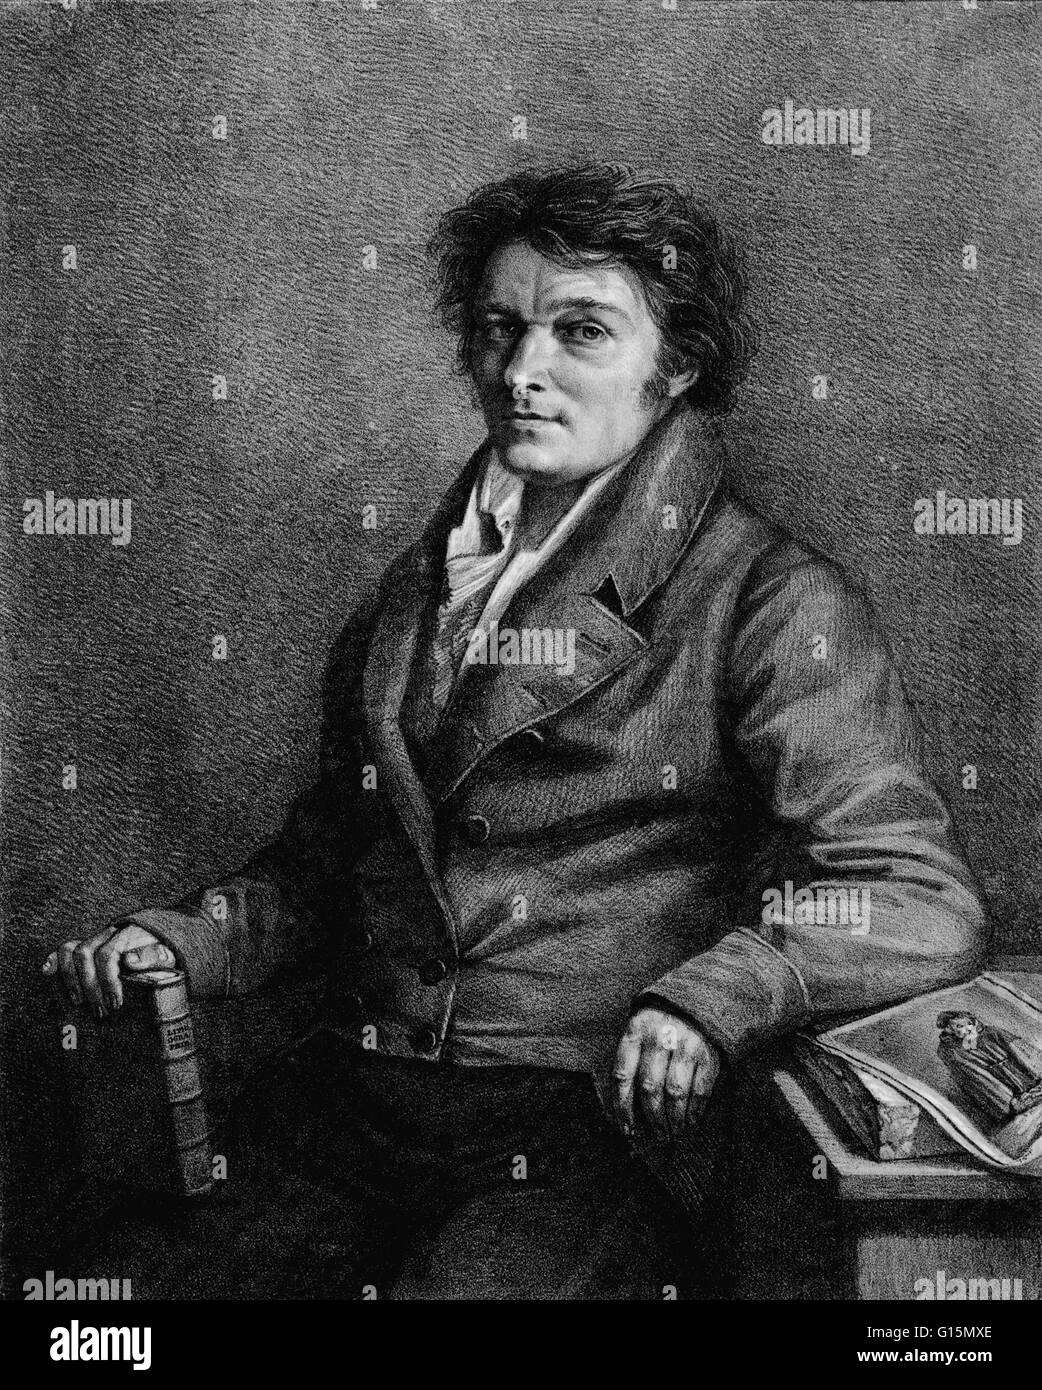 Johann Alois Senefelder (November 6, 1771 - February 26, 1834) was a German actor and playwright who invented the printing technique of lithography in 1796. He experimented with a novel etching technique using a greasy, acid resistant ink as a resist on a Stock Photo